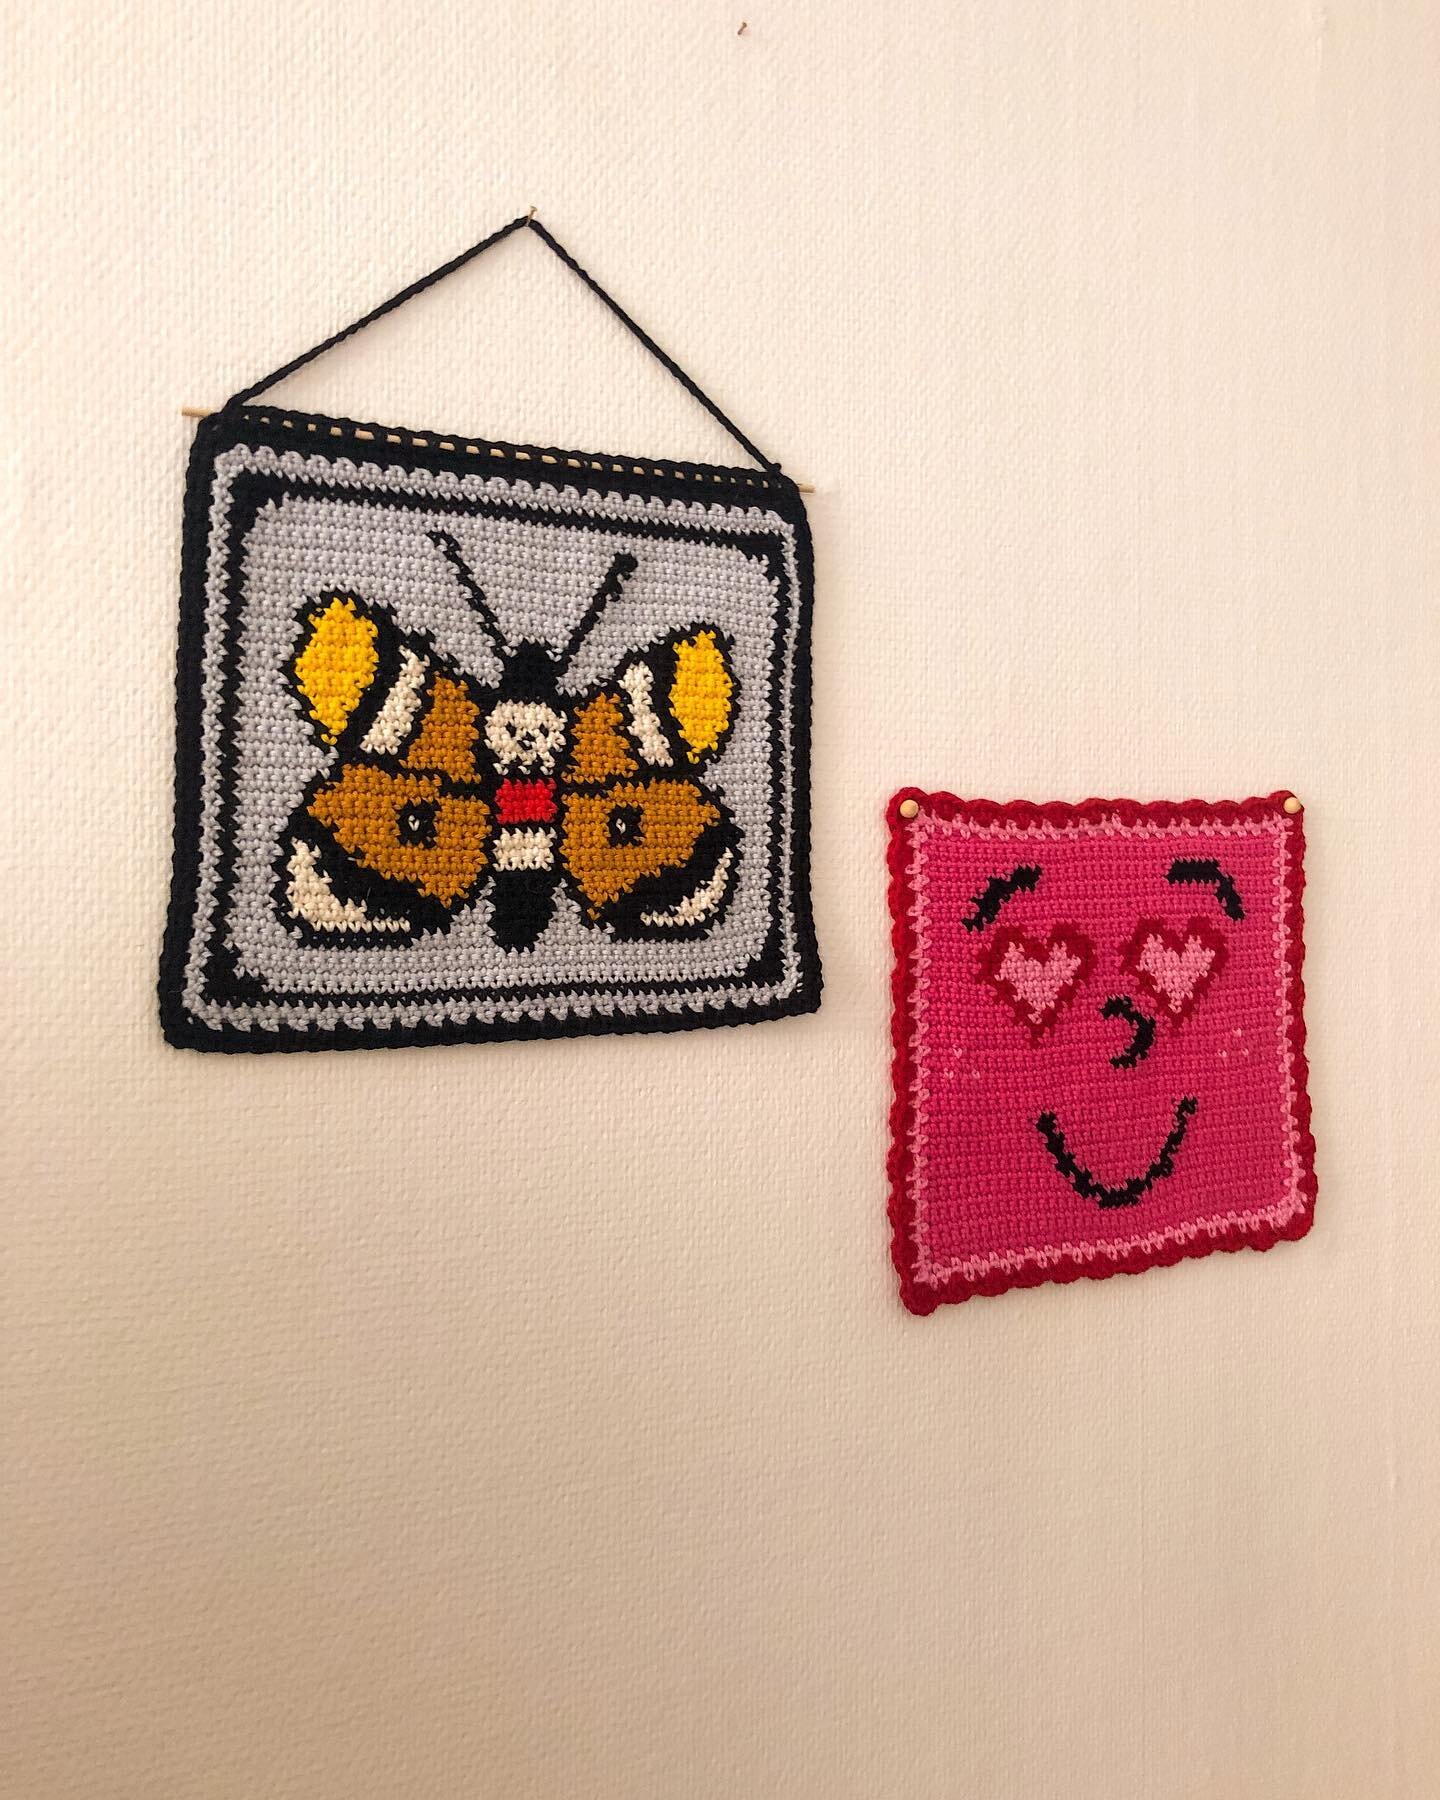 I&rsquo;ve been on a crochet tapestry making kick b/c how else would you fill a blank white wall??

Death moth pattern by @destiny.makes and So Emotional heart eyes by @ty_bailie 

#tapestrycrochet #crochet #intarsiacrochet #graphgan #crochetlove